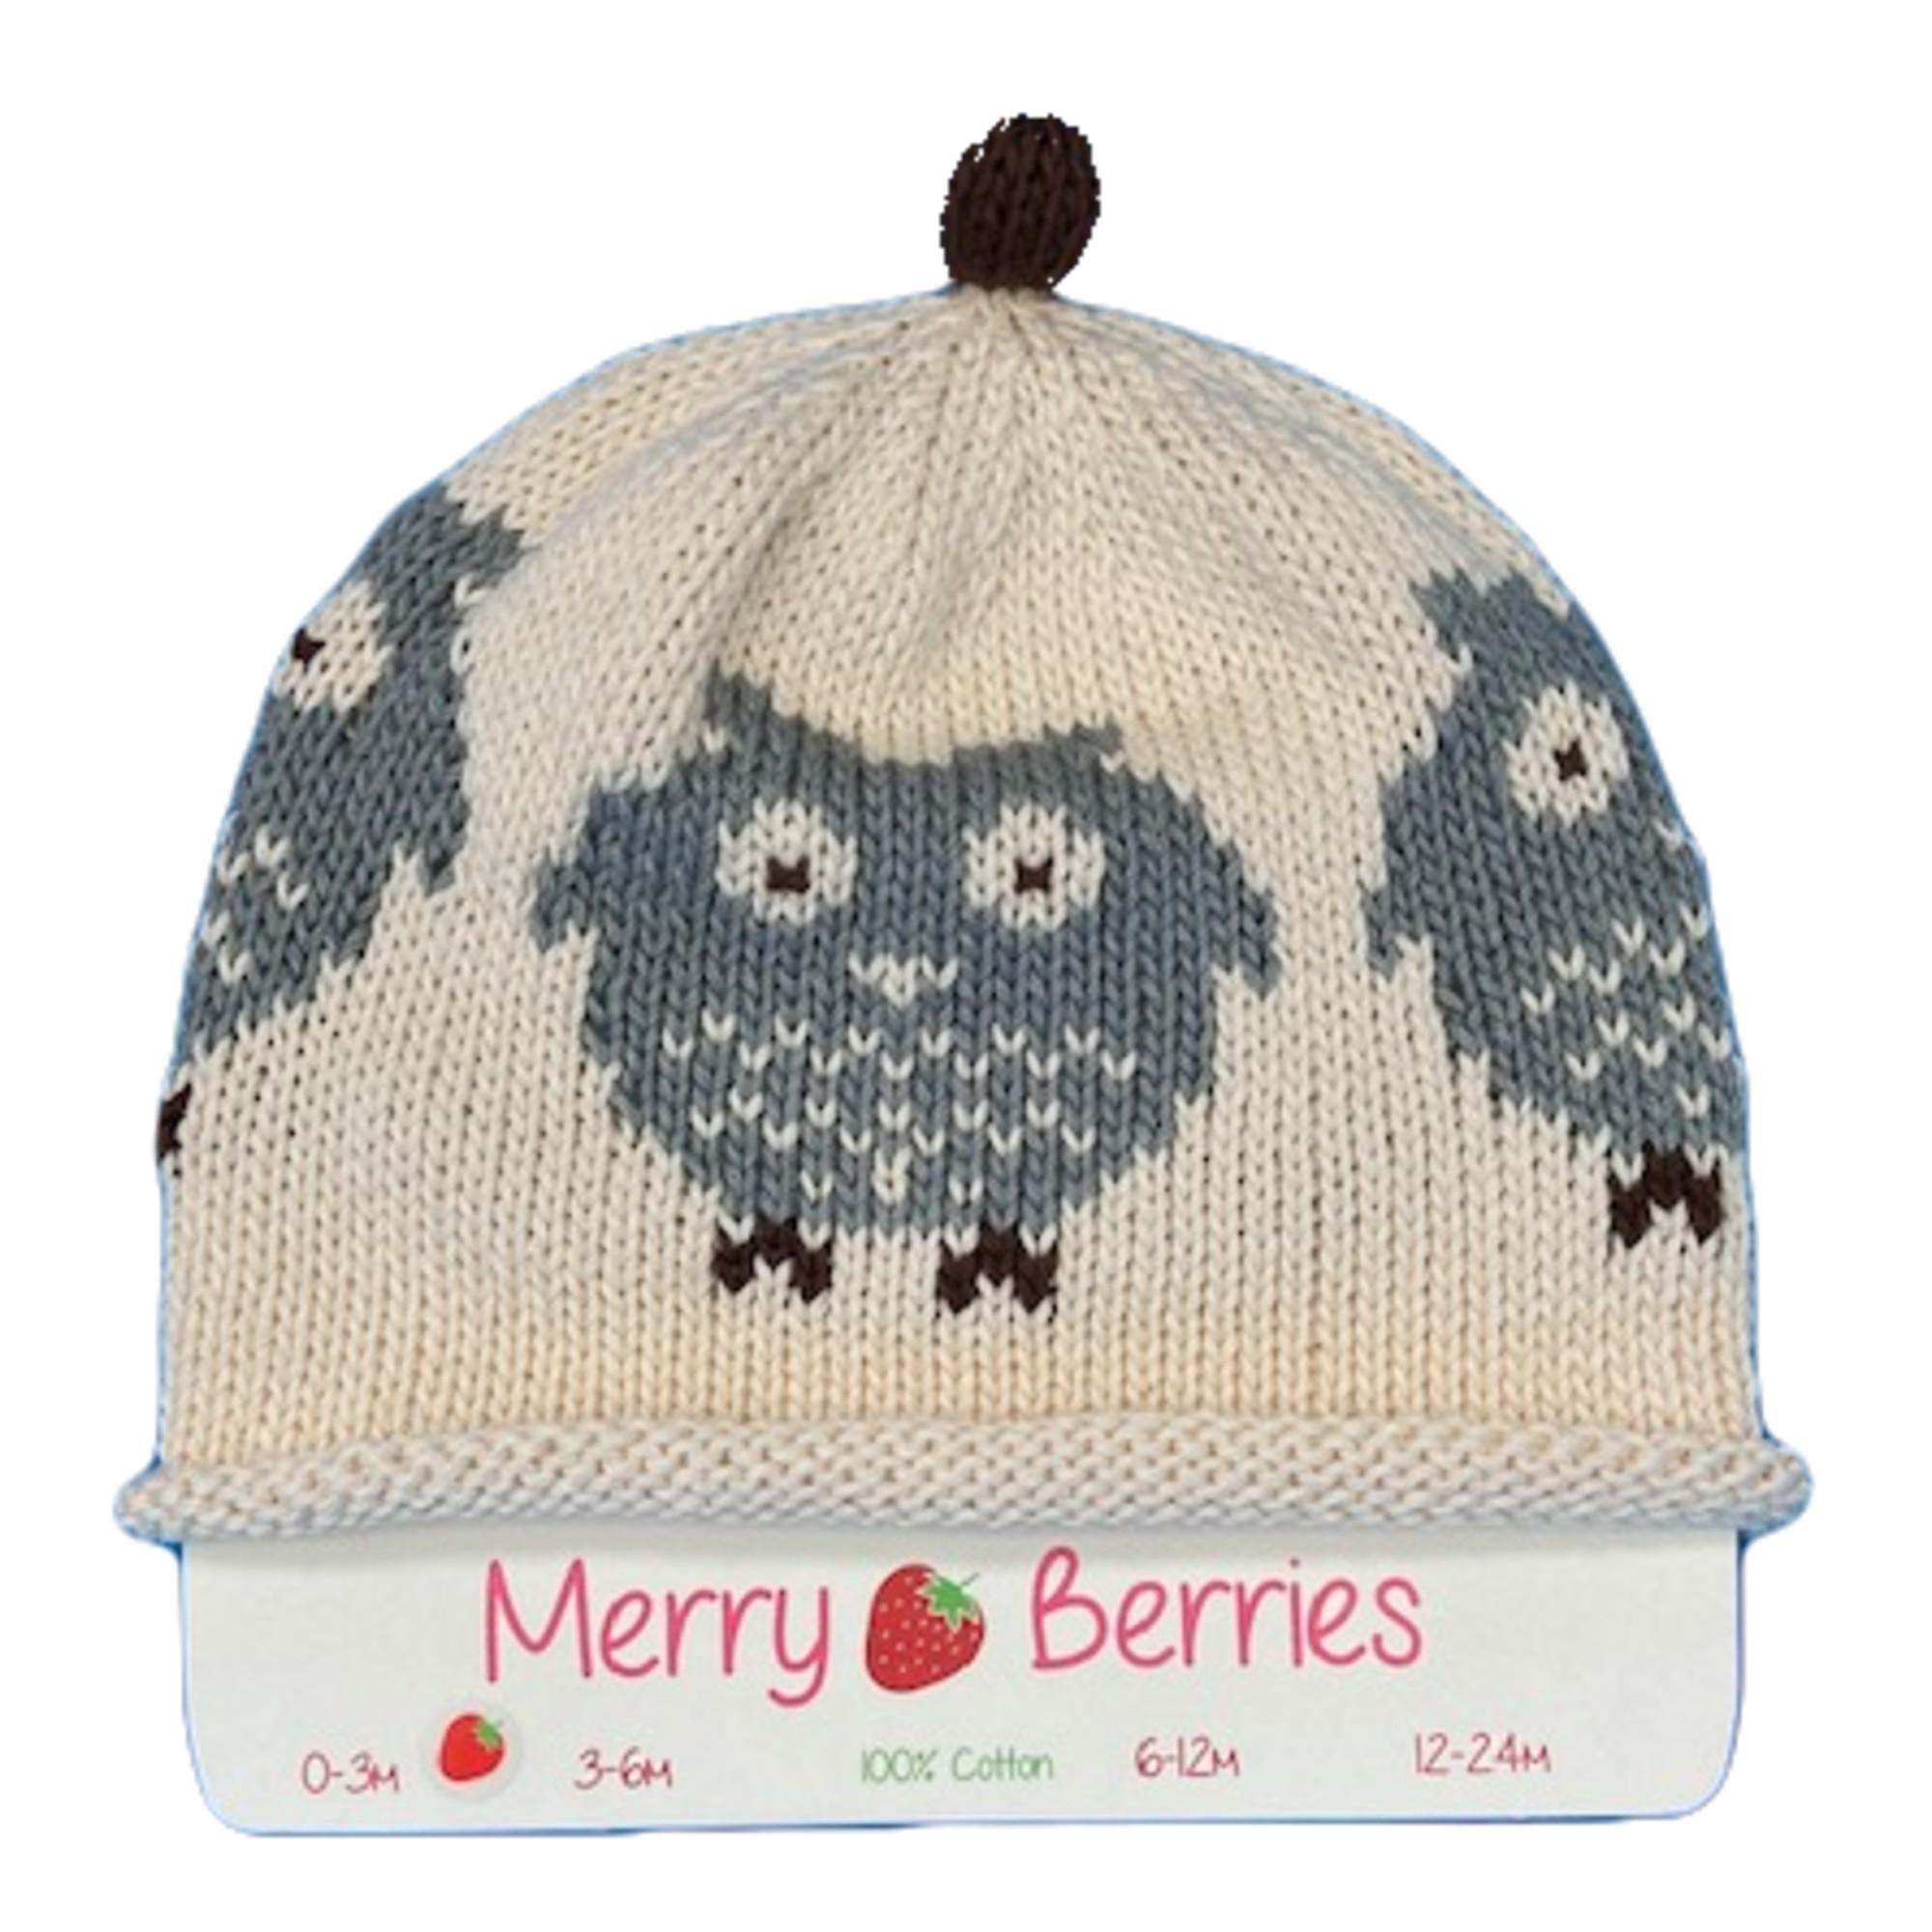 Merry Berries - Grey Owl Knitted baby Hat-0-24mths-Cotton